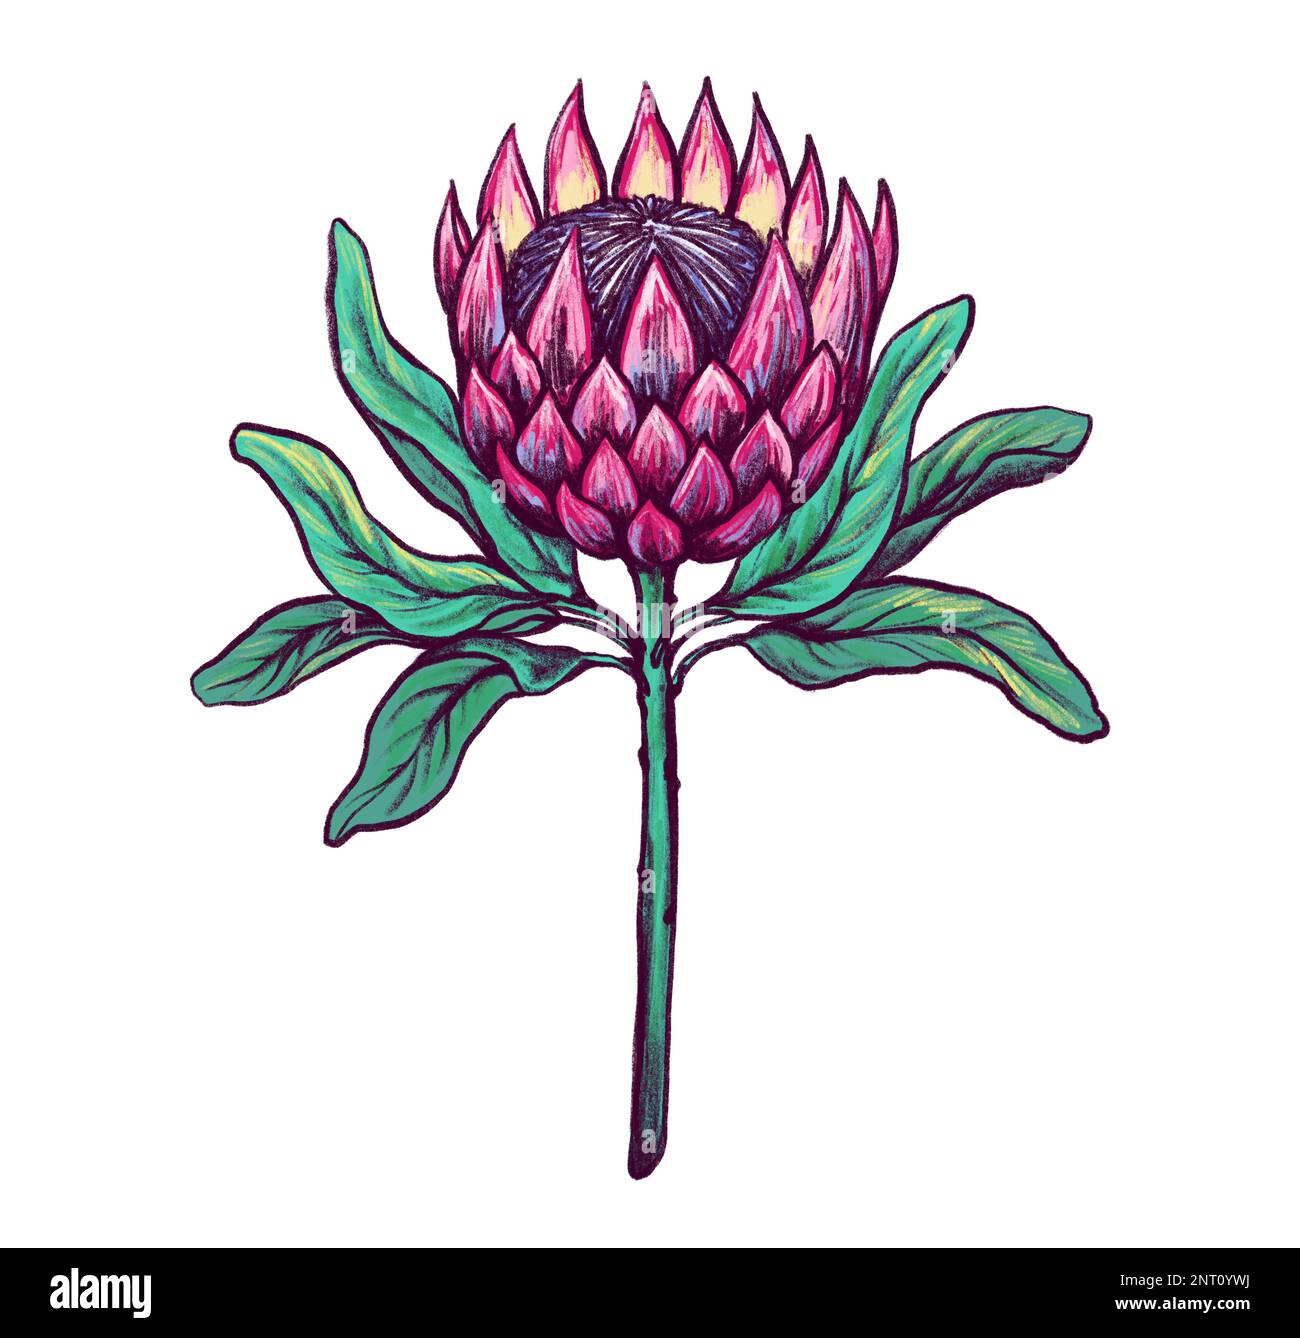 Protea flower hand drawn botanical illustration color ink sketch line art isolated on white background stock photo